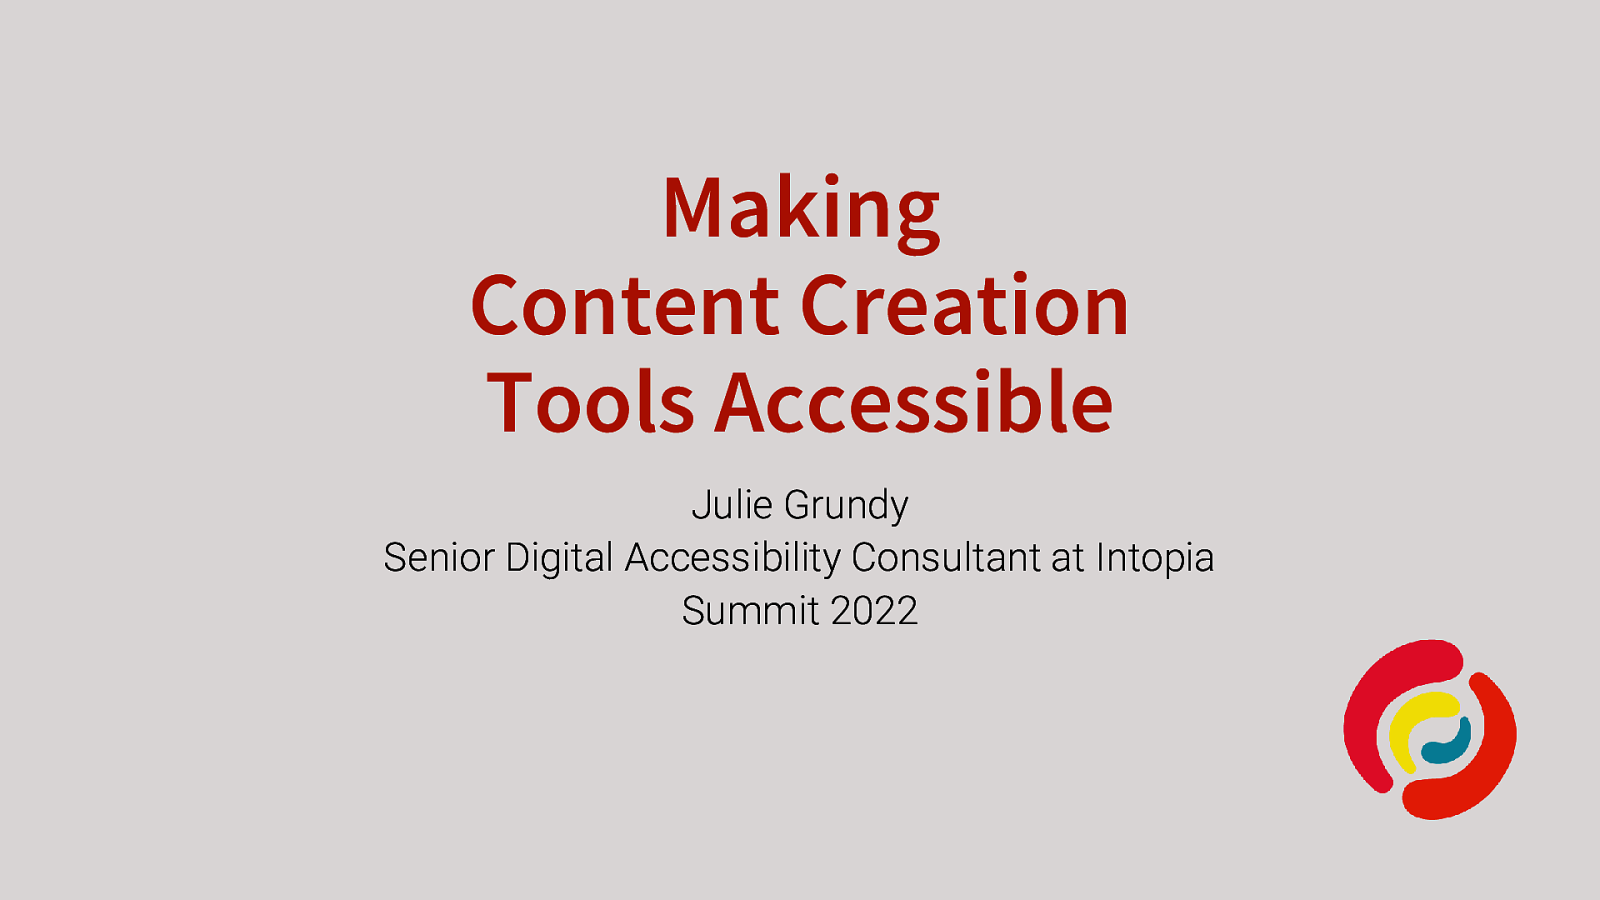 Making Content Creation Tools Accessible by Julie Grundy